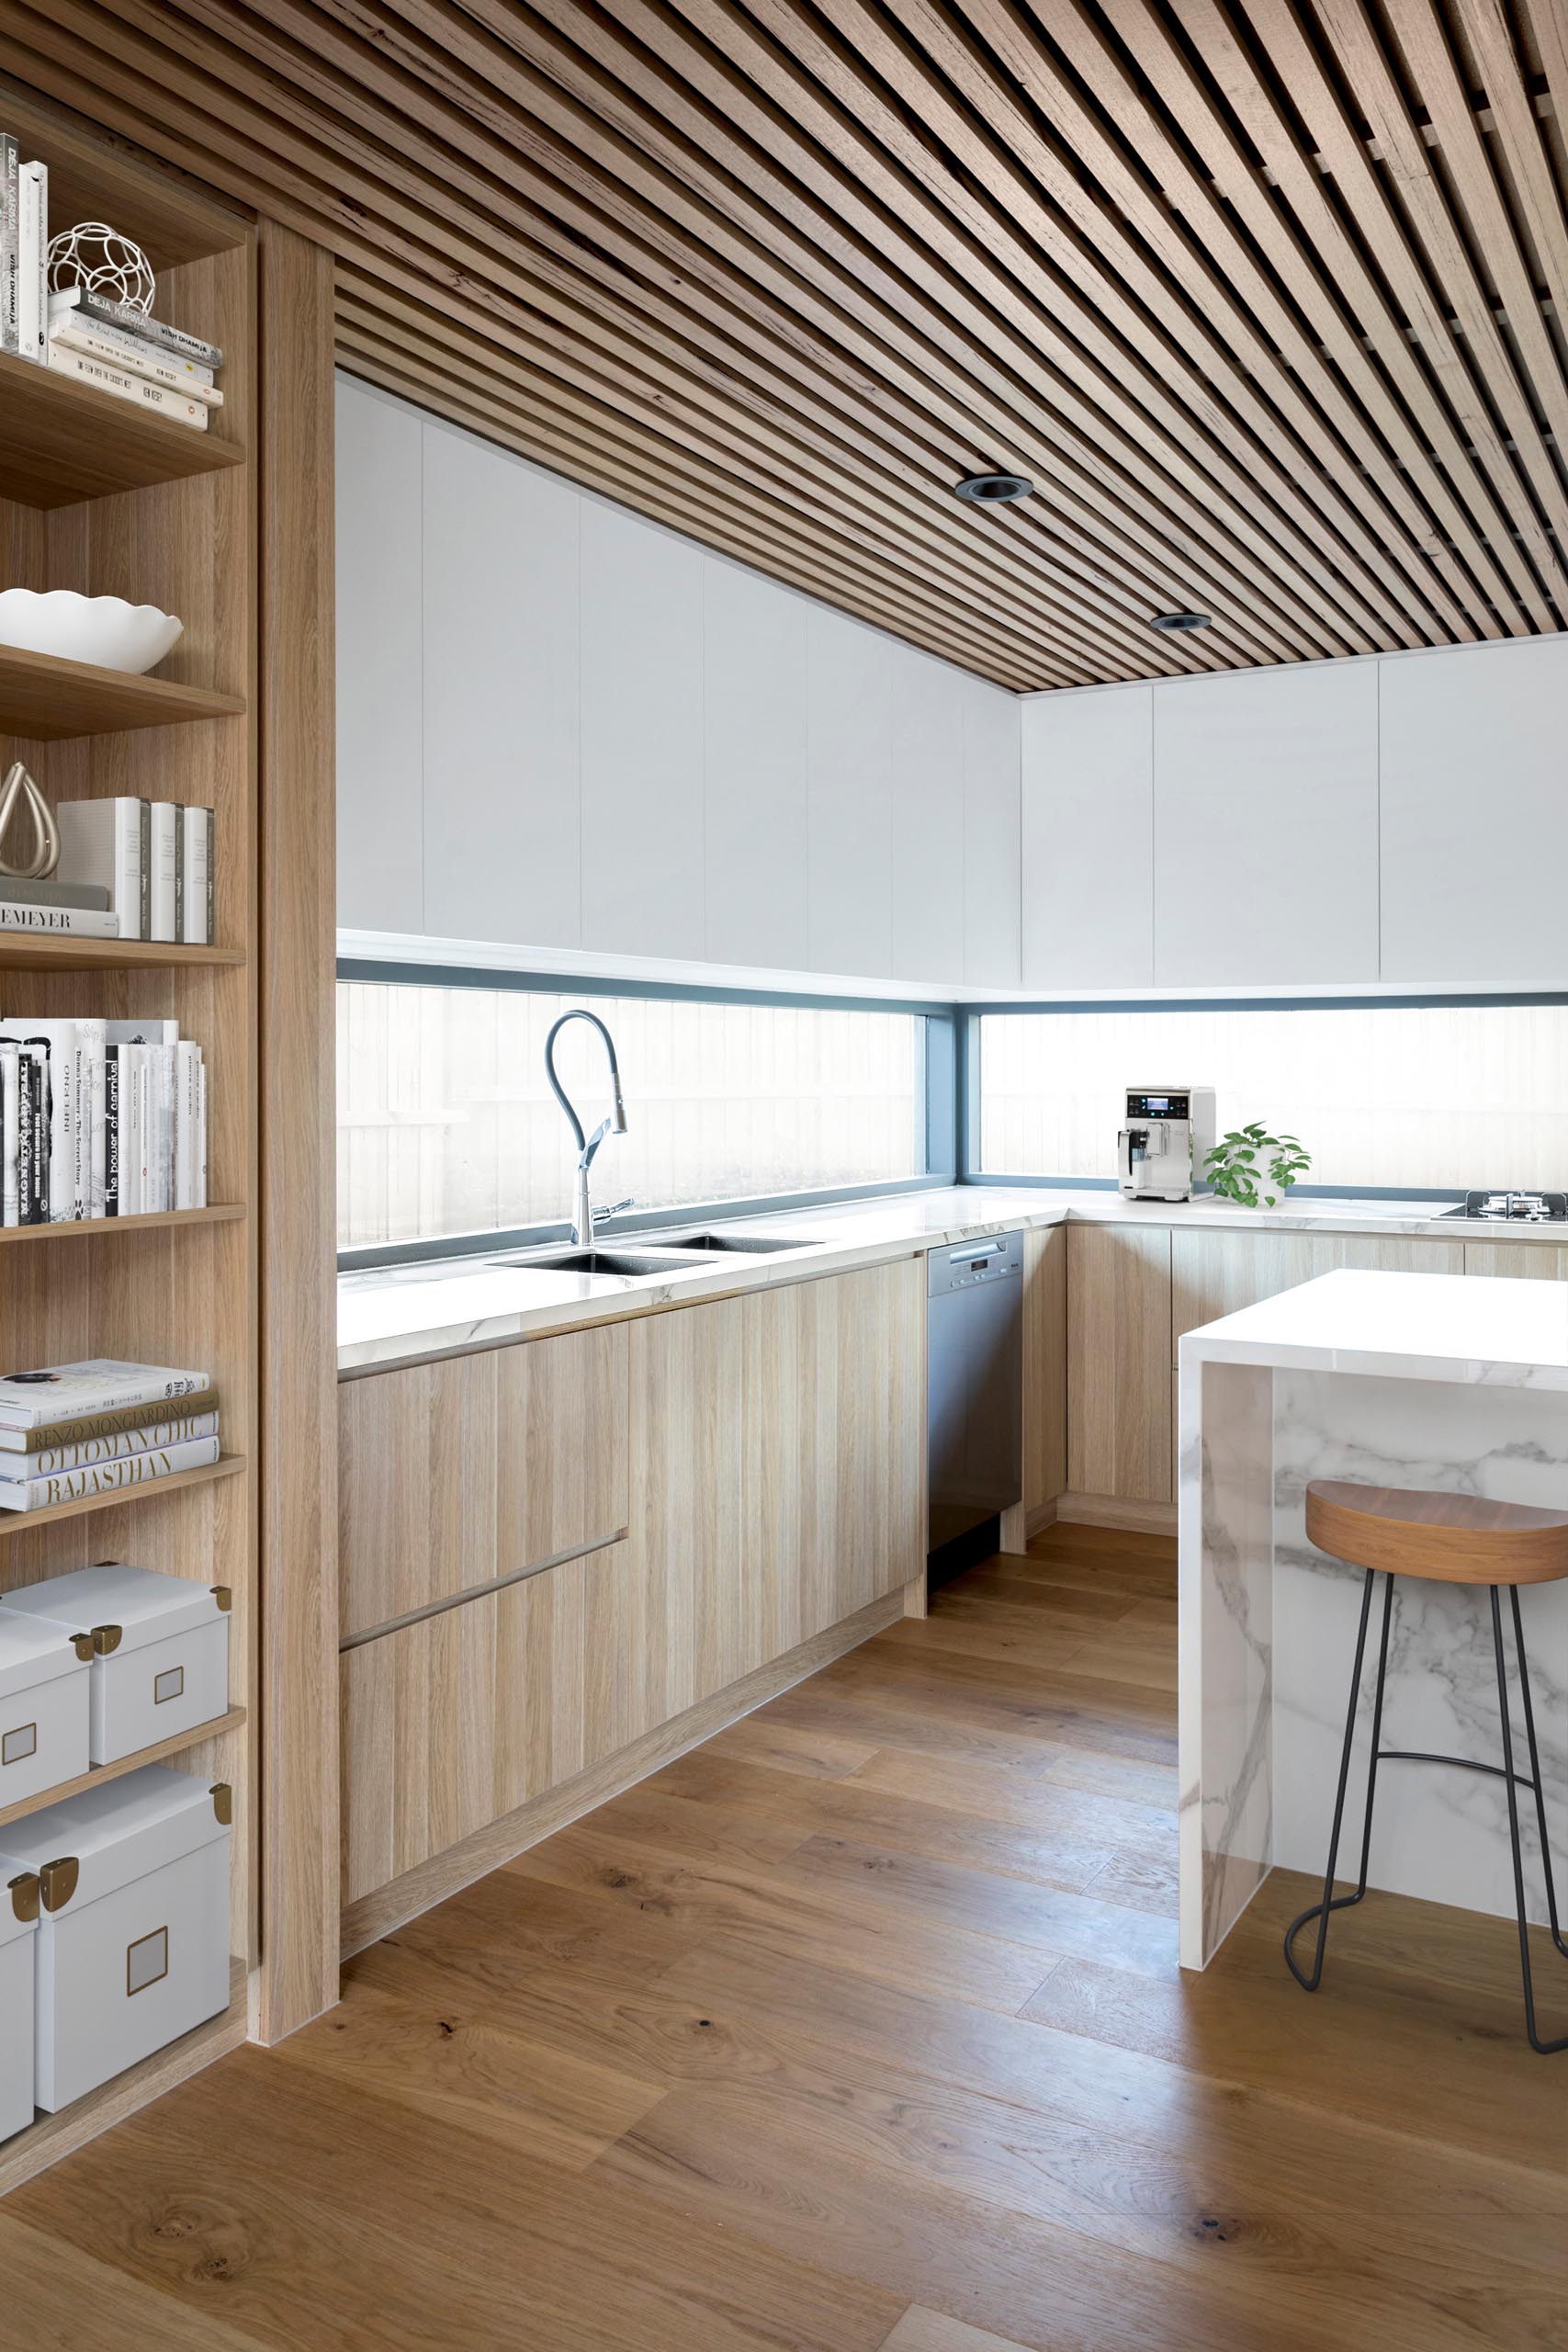 A modern kitchen with a wood ceiling, minimalist cabinets, and a marble island.